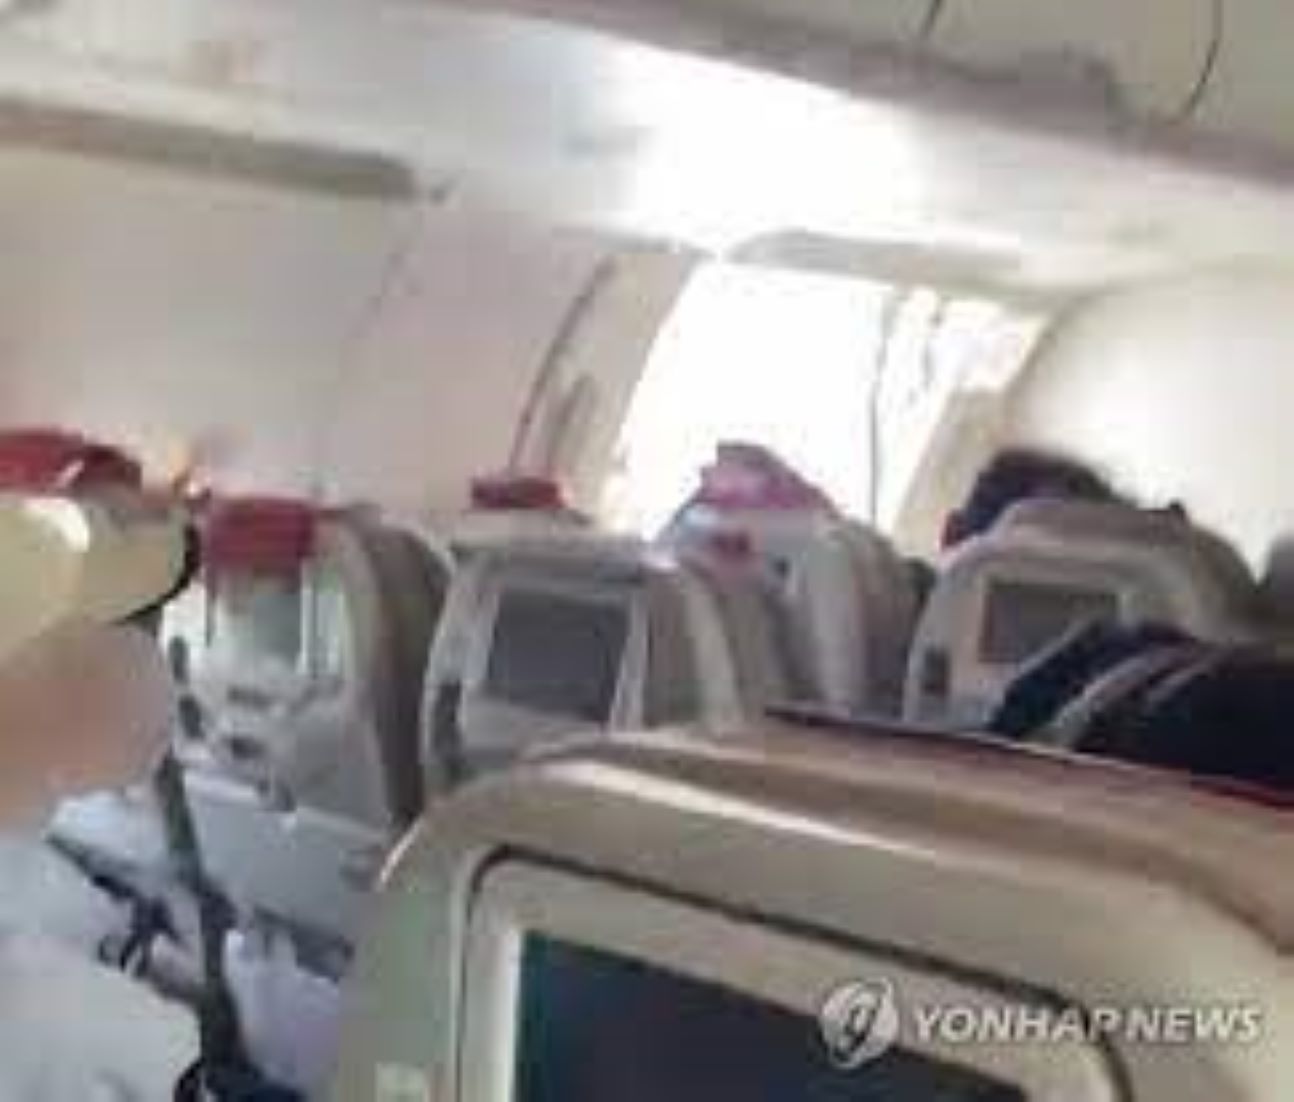 Nine People Suffered Breathing Difficulty As S. Korean Aircraft Landed With Door Opened